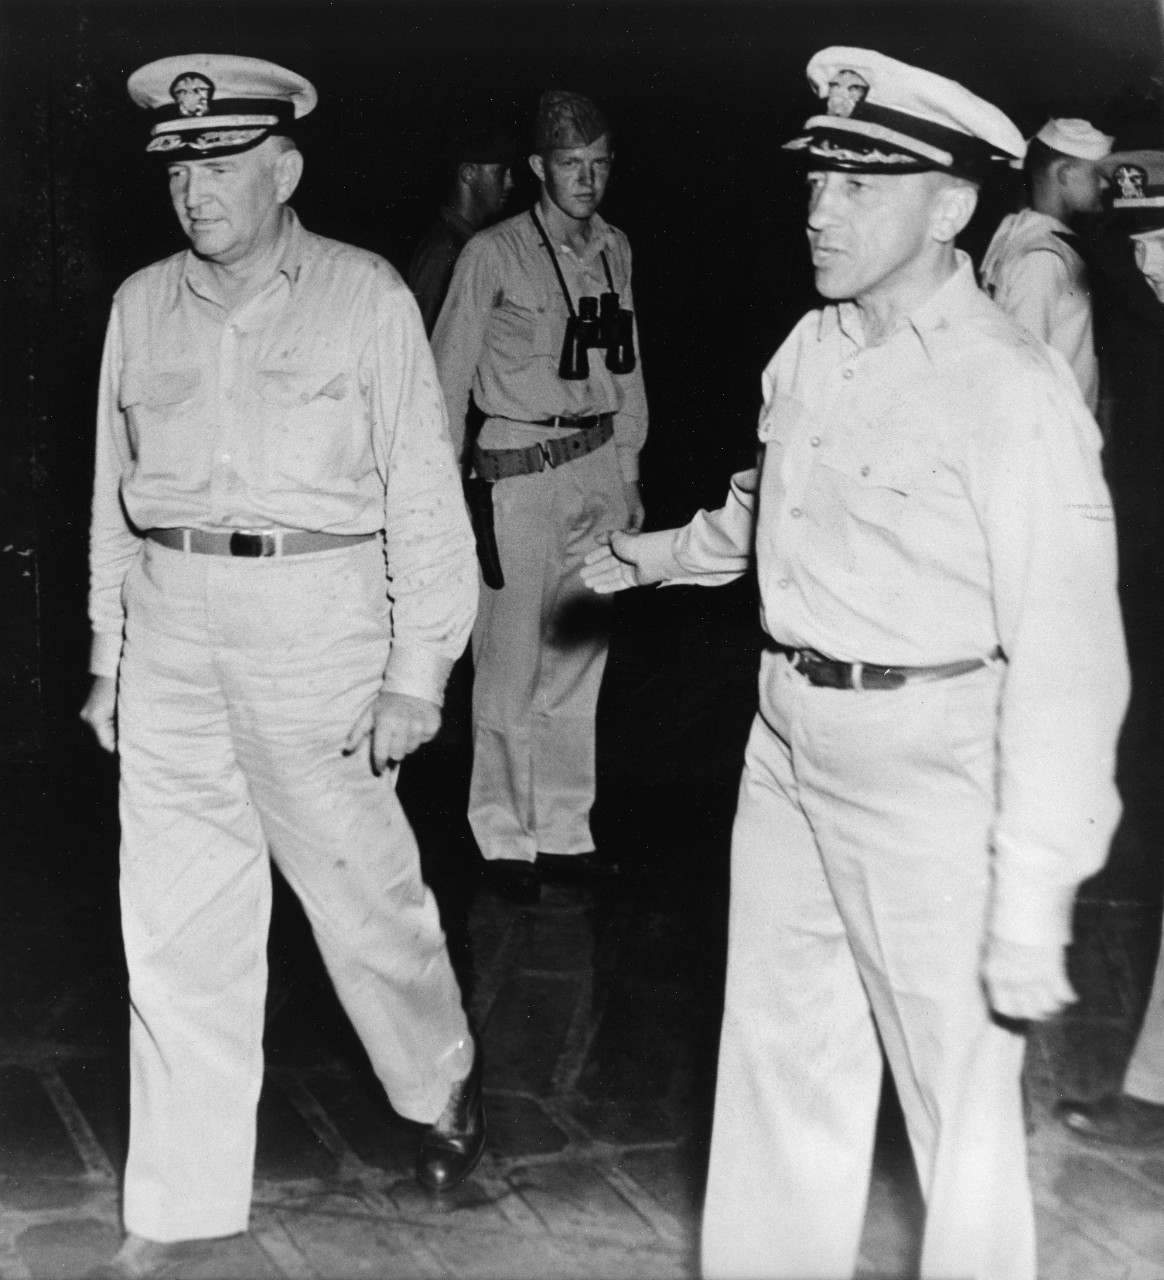 Captain T.G.W. Settle, USN (at right) with Vice Admiral J.B. Oldendorf, USN, on USS Portland (CA-33) shortly before the ceremonies at which Captain Settle would be awarded the Navy Cross after the Battle of Surigao Strait, 24-25 October 1944.